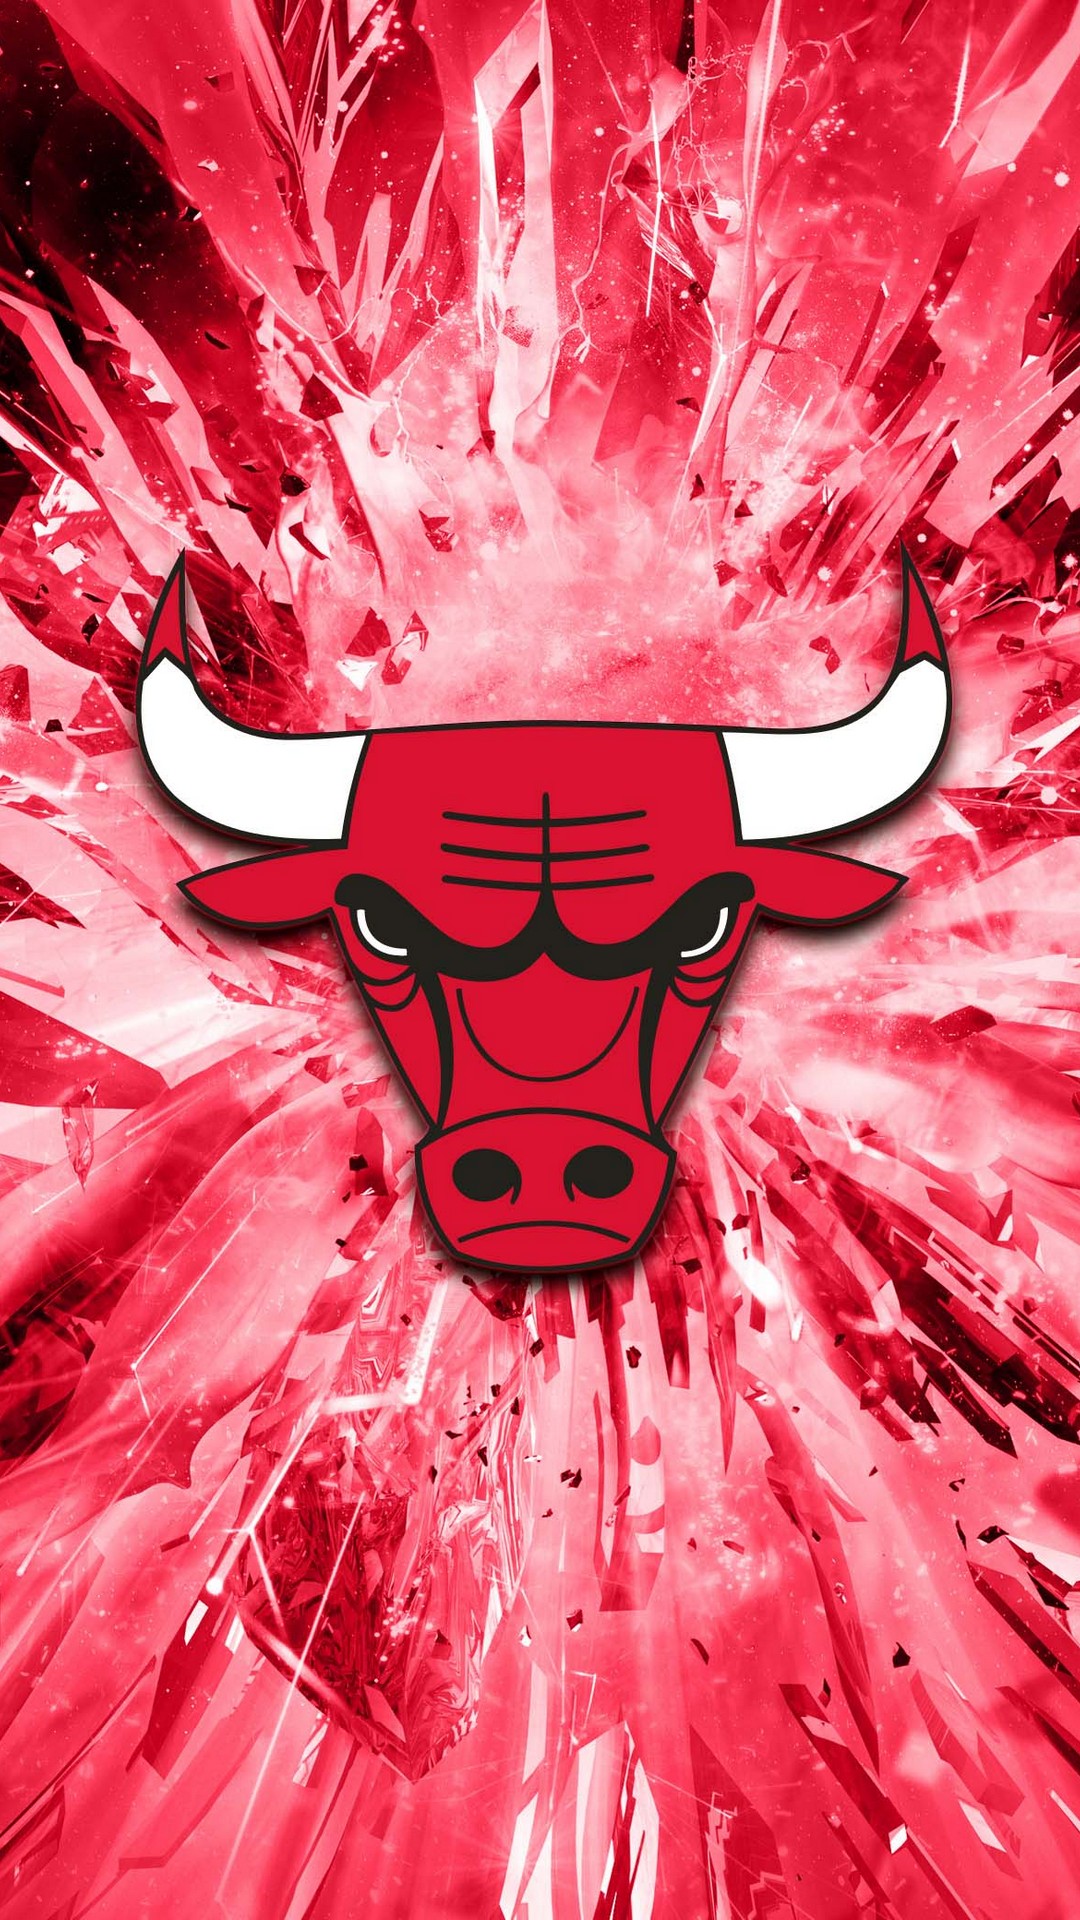 iPhone Wallpaper HD Chicago Bulls with high-resolution 1080x1920 pixel. You can use this wallpaper for your Desktop Computer Backgrounds, Windows or Mac Screensavers, iPhone Lock screen, Tablet or Android and another Mobile Phone device